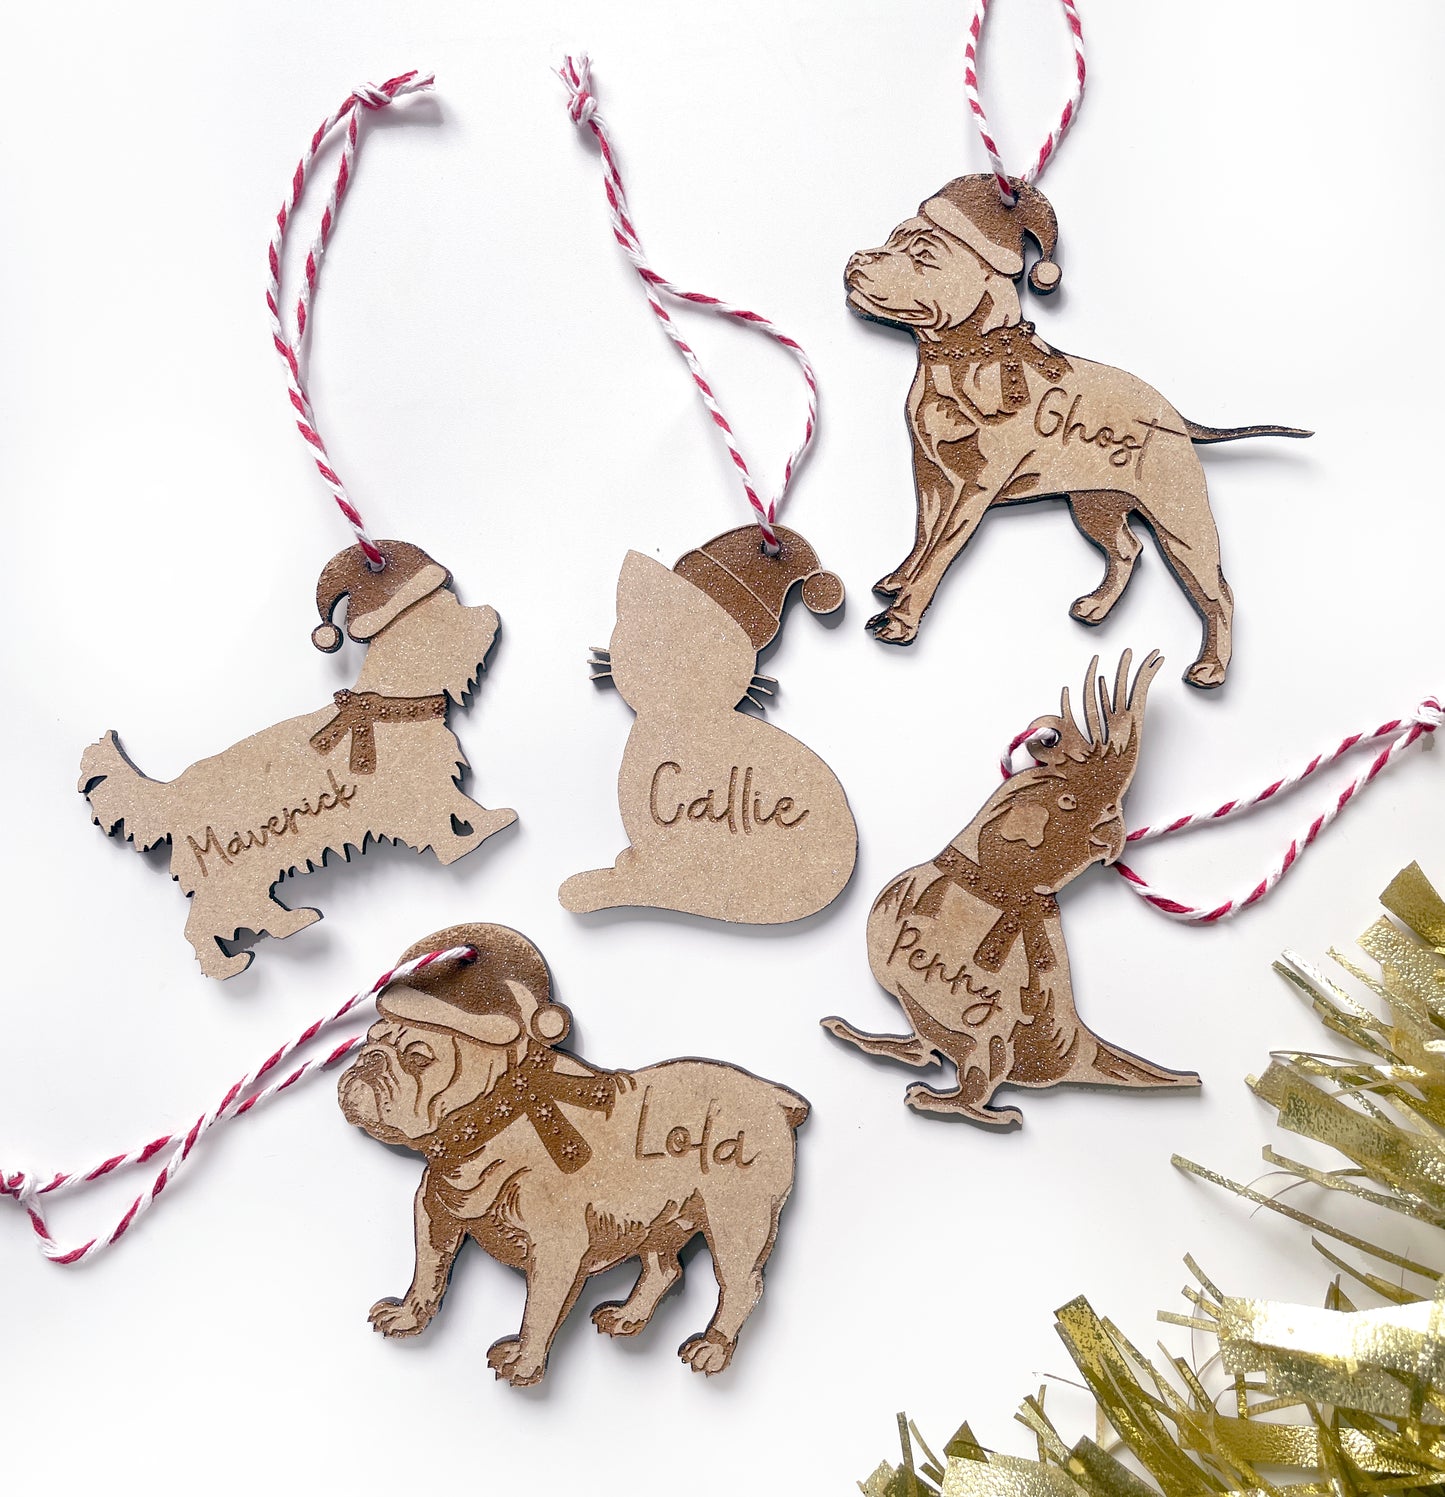 Personalised Pet shaped decorations - designed to a specific pet breed. Eg. yorkie, sausage dog etc